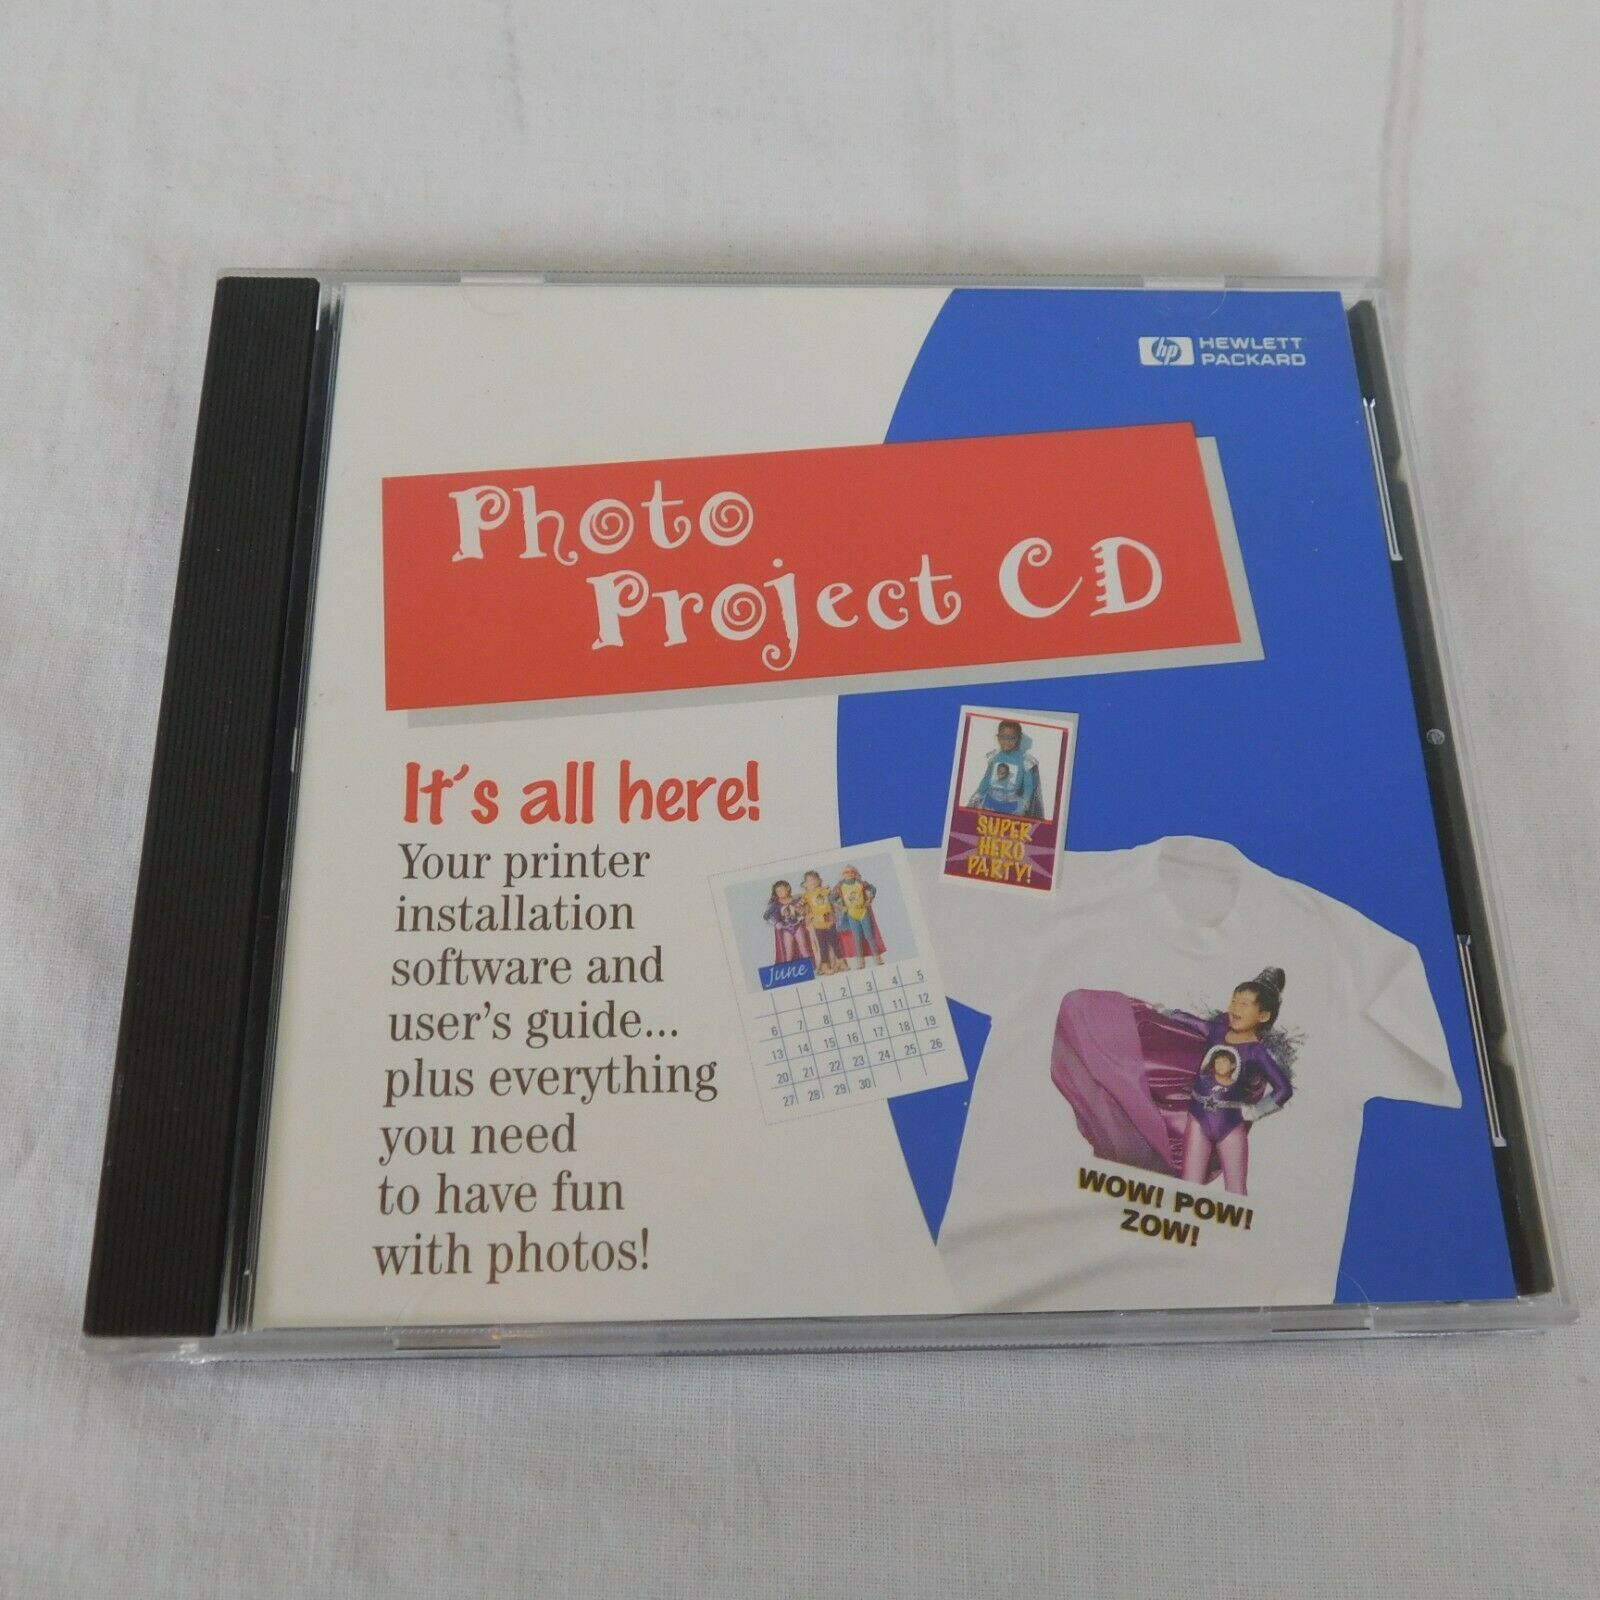 Photo Project CD ROM Hewlett Packard 1997 Have Fun w Photos PrintPak Iron-Ons - $4.00